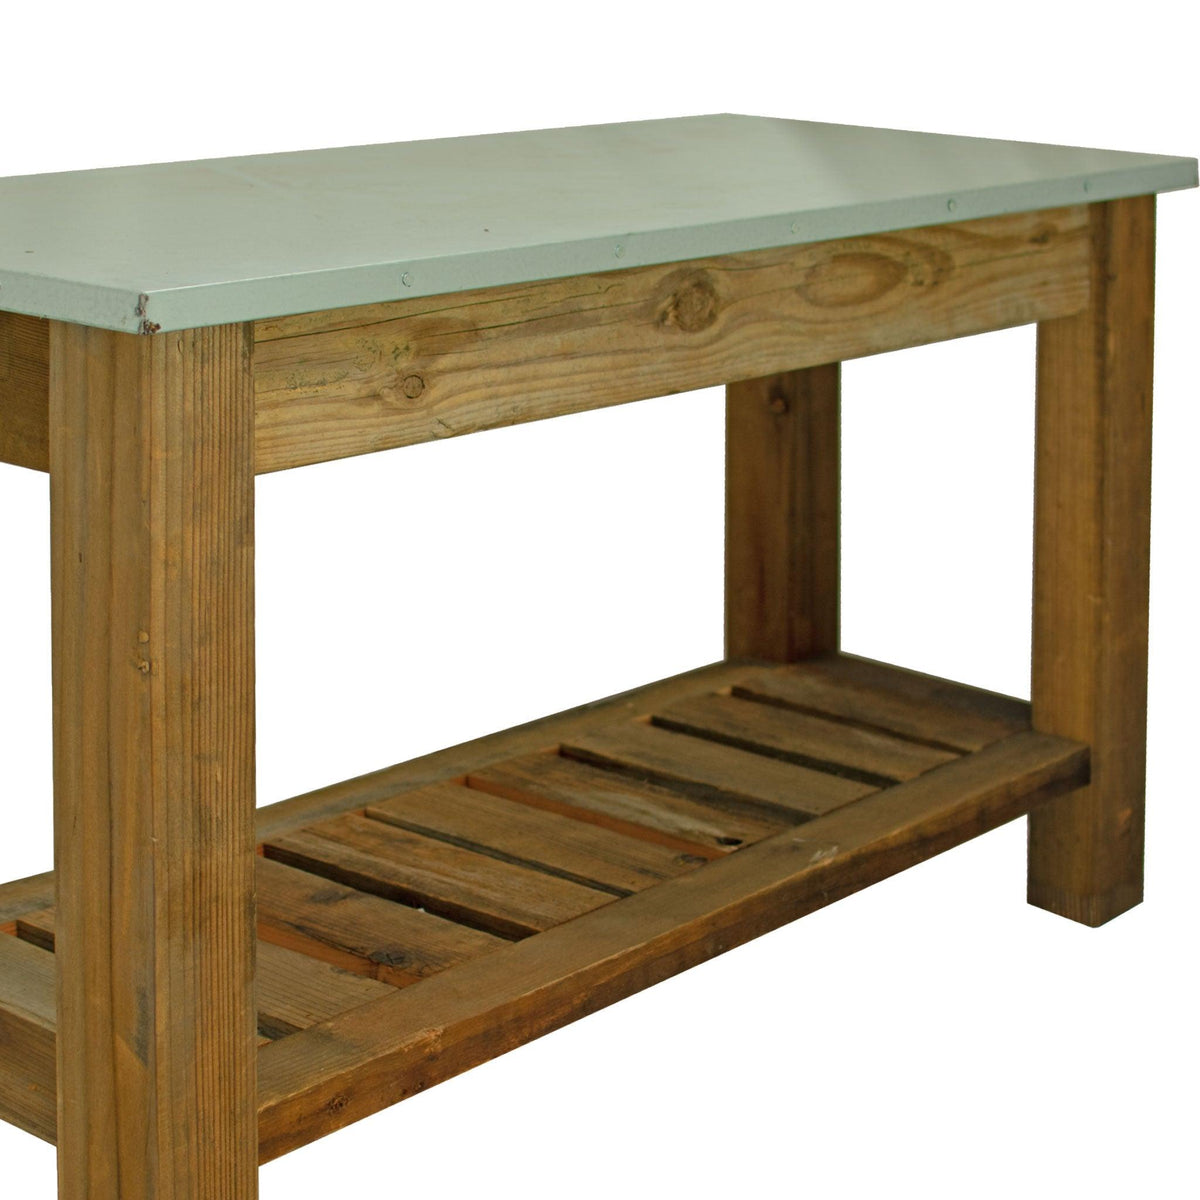 Lee Display's Redwood Outdoor Patio Console Table   Built by Lee Display & Made in the USA.  On sale now at leedisplay.com.  Great for a lightweight Potting Table and Gardening Work Bench.